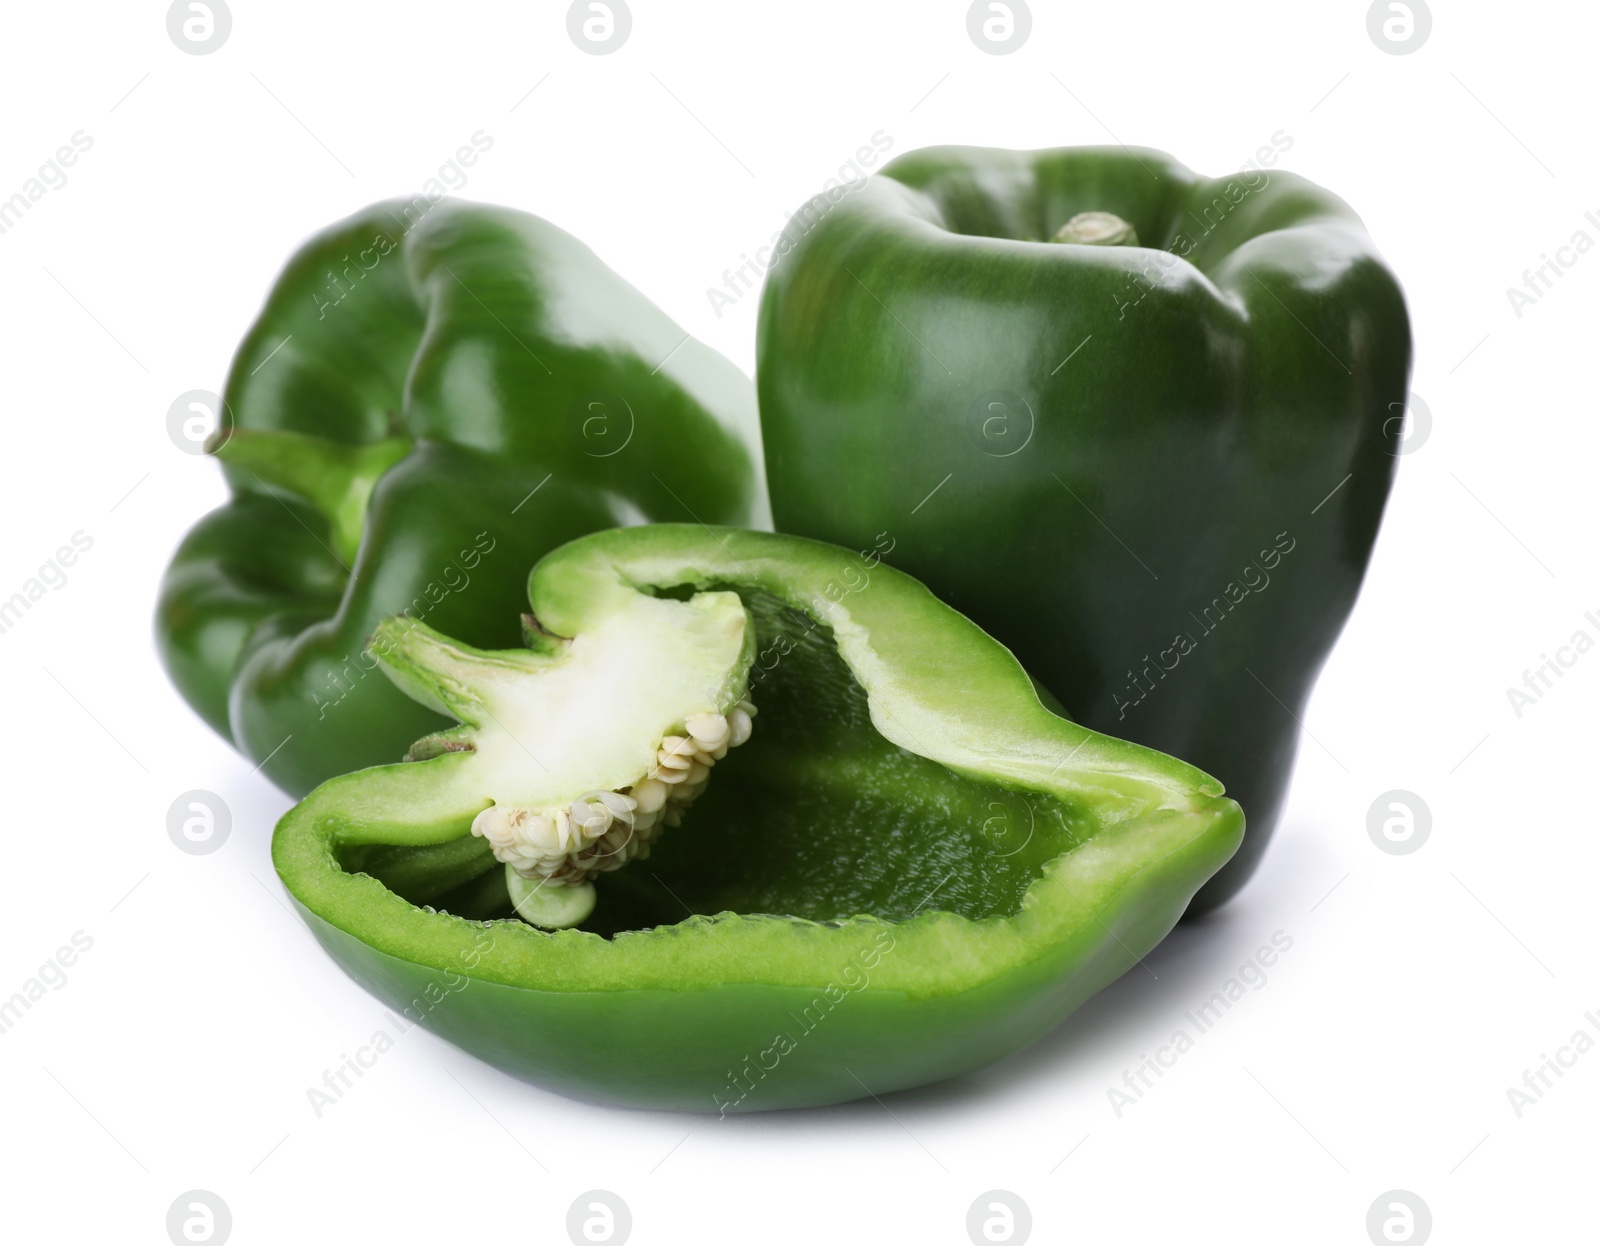 Photo of Whole and cut green bell peppers isolated on white